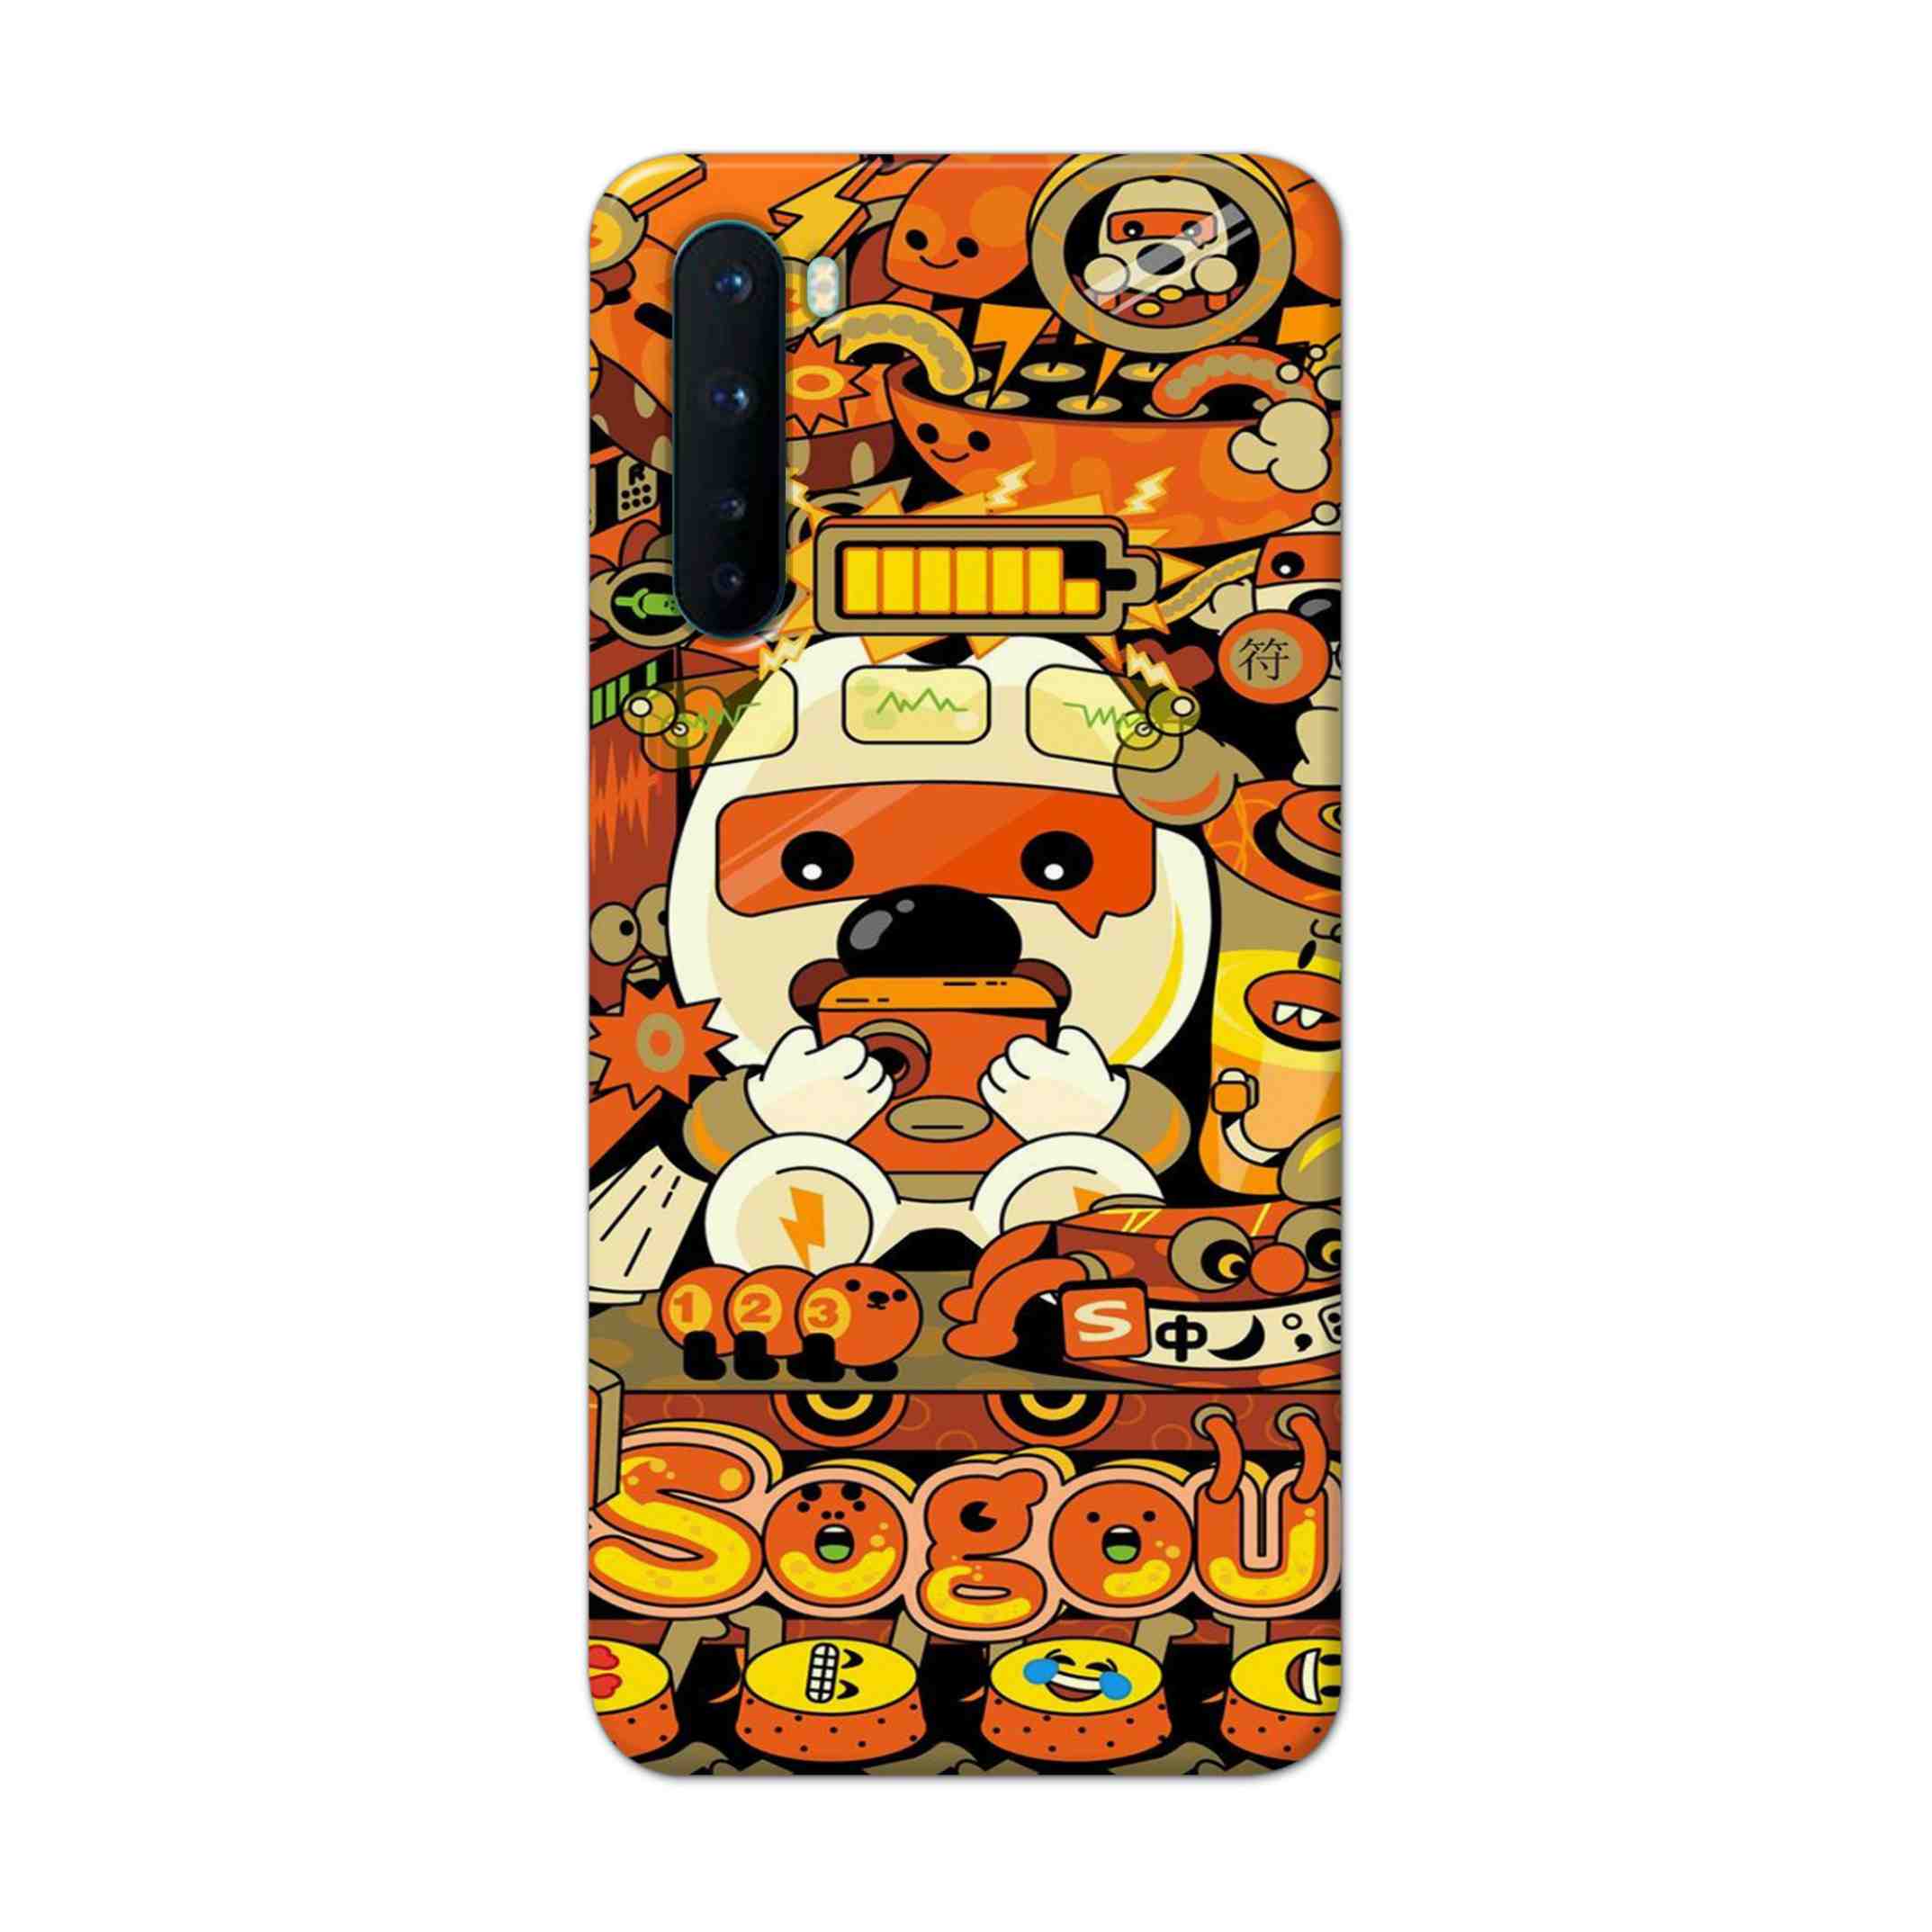 Buy Sogou Hard Back Mobile Phone Case Cover For OnePlus Nord Online